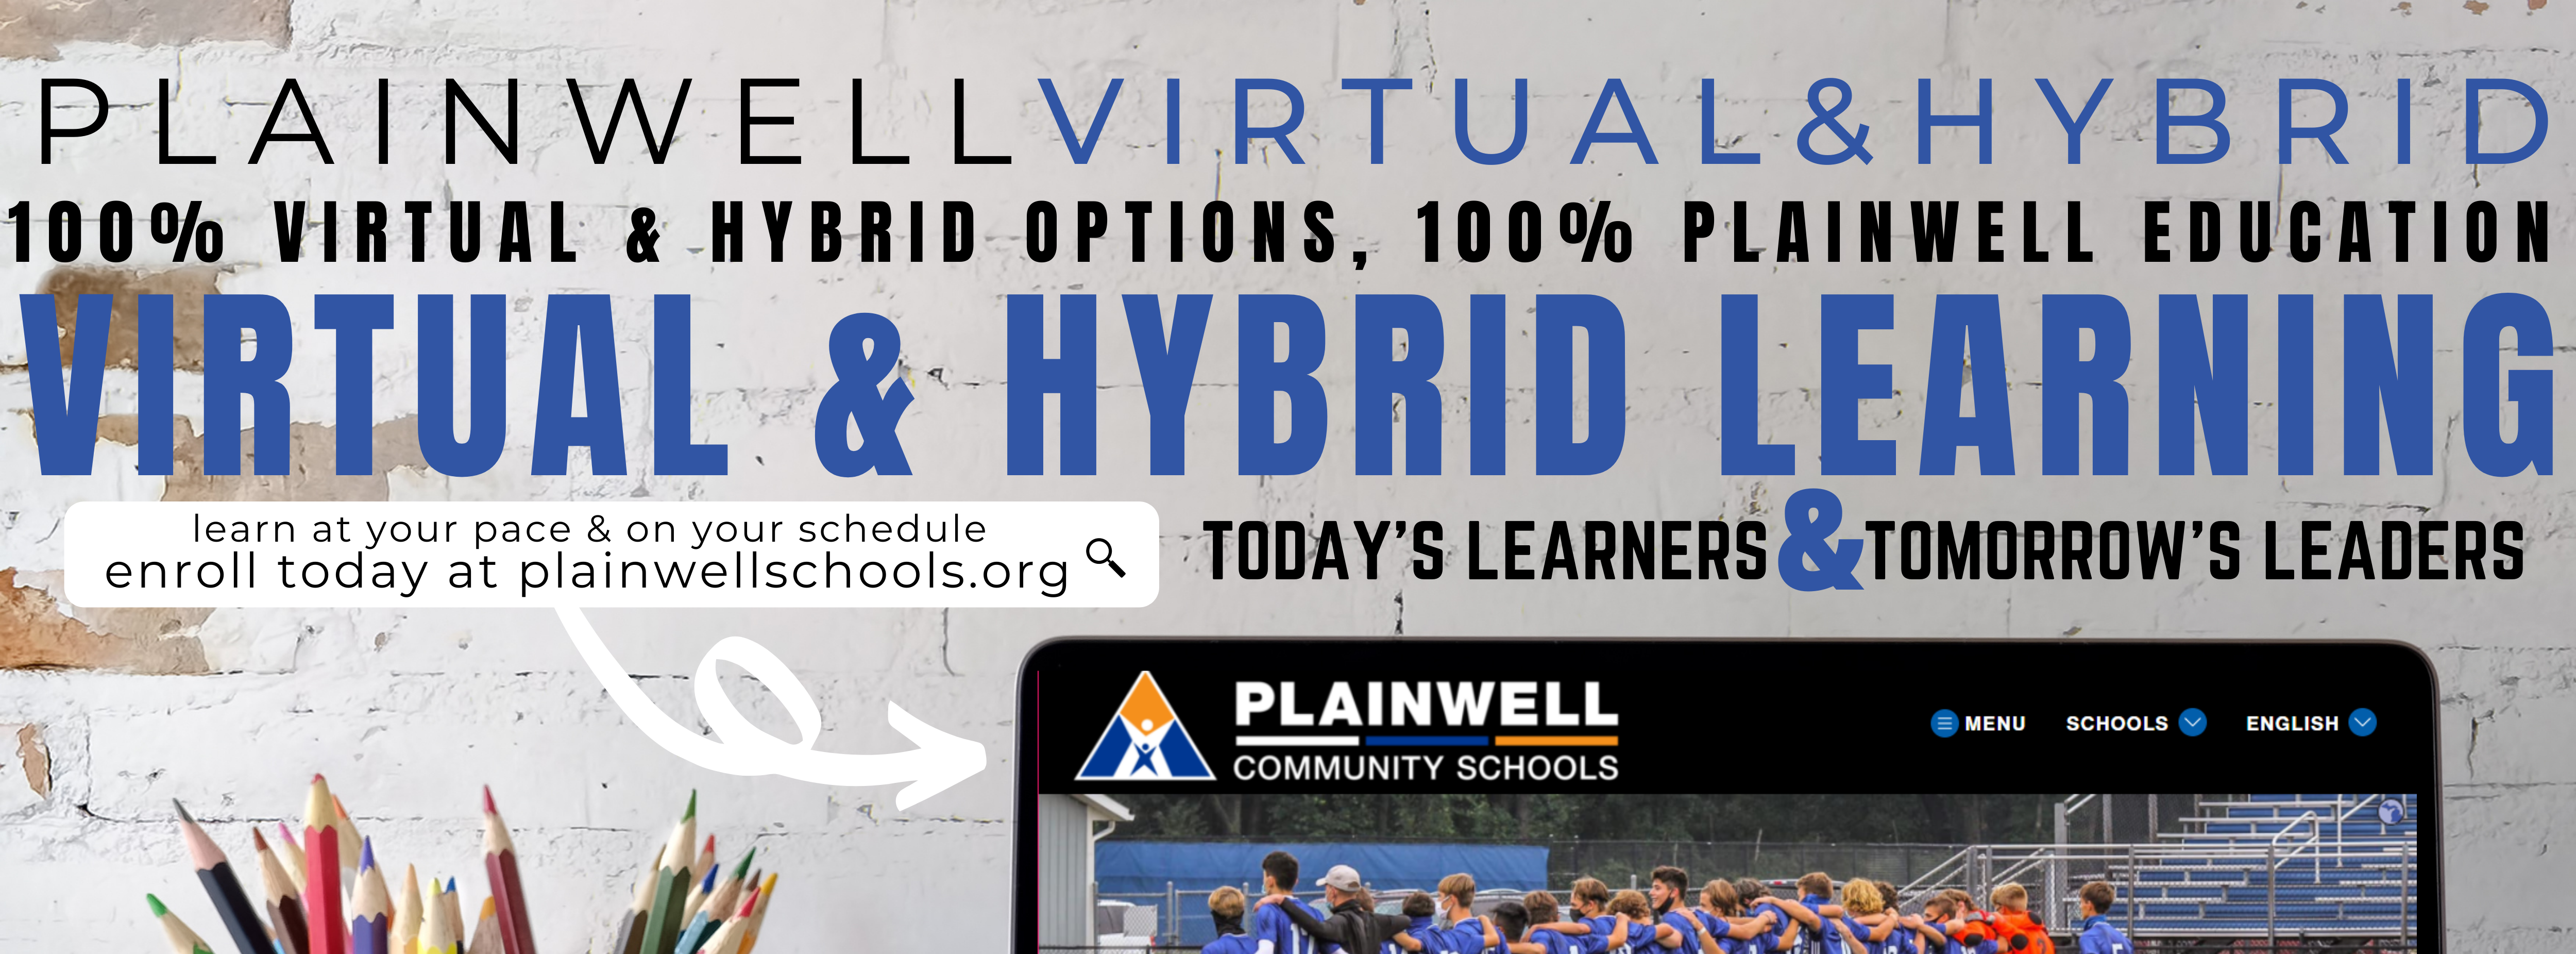 Virtual and hybrid learning banner with picture of laptop and colored pencils